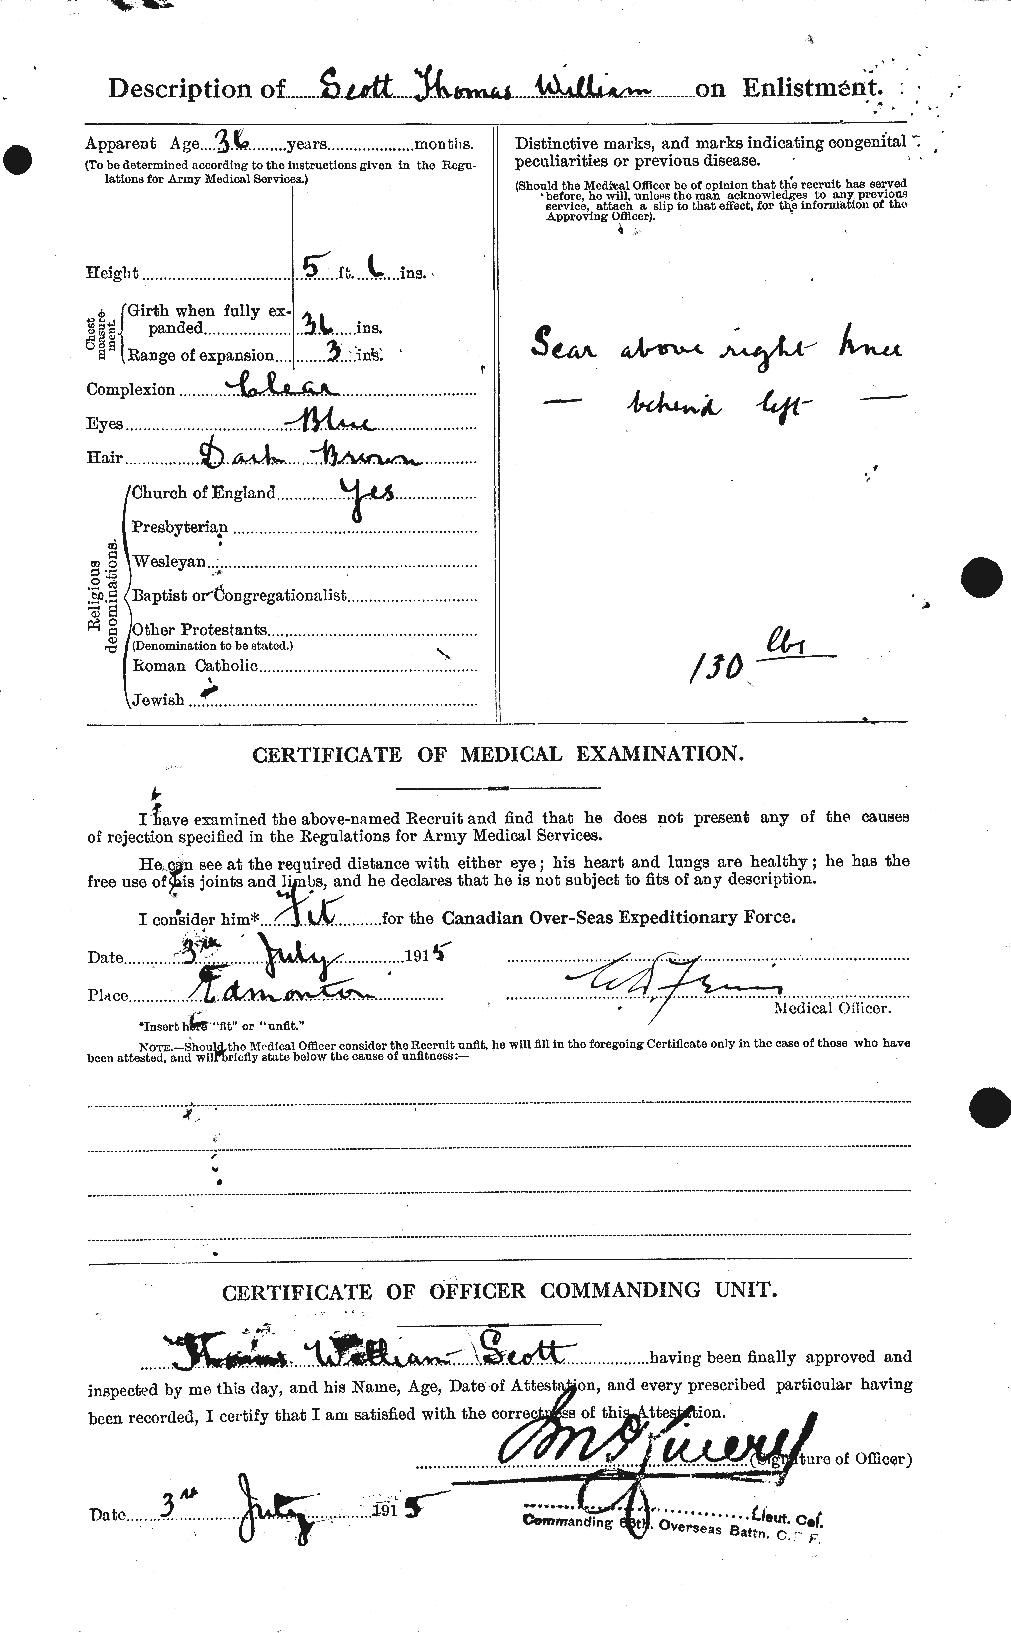 Personnel Records of the First World War - CEF 088215b